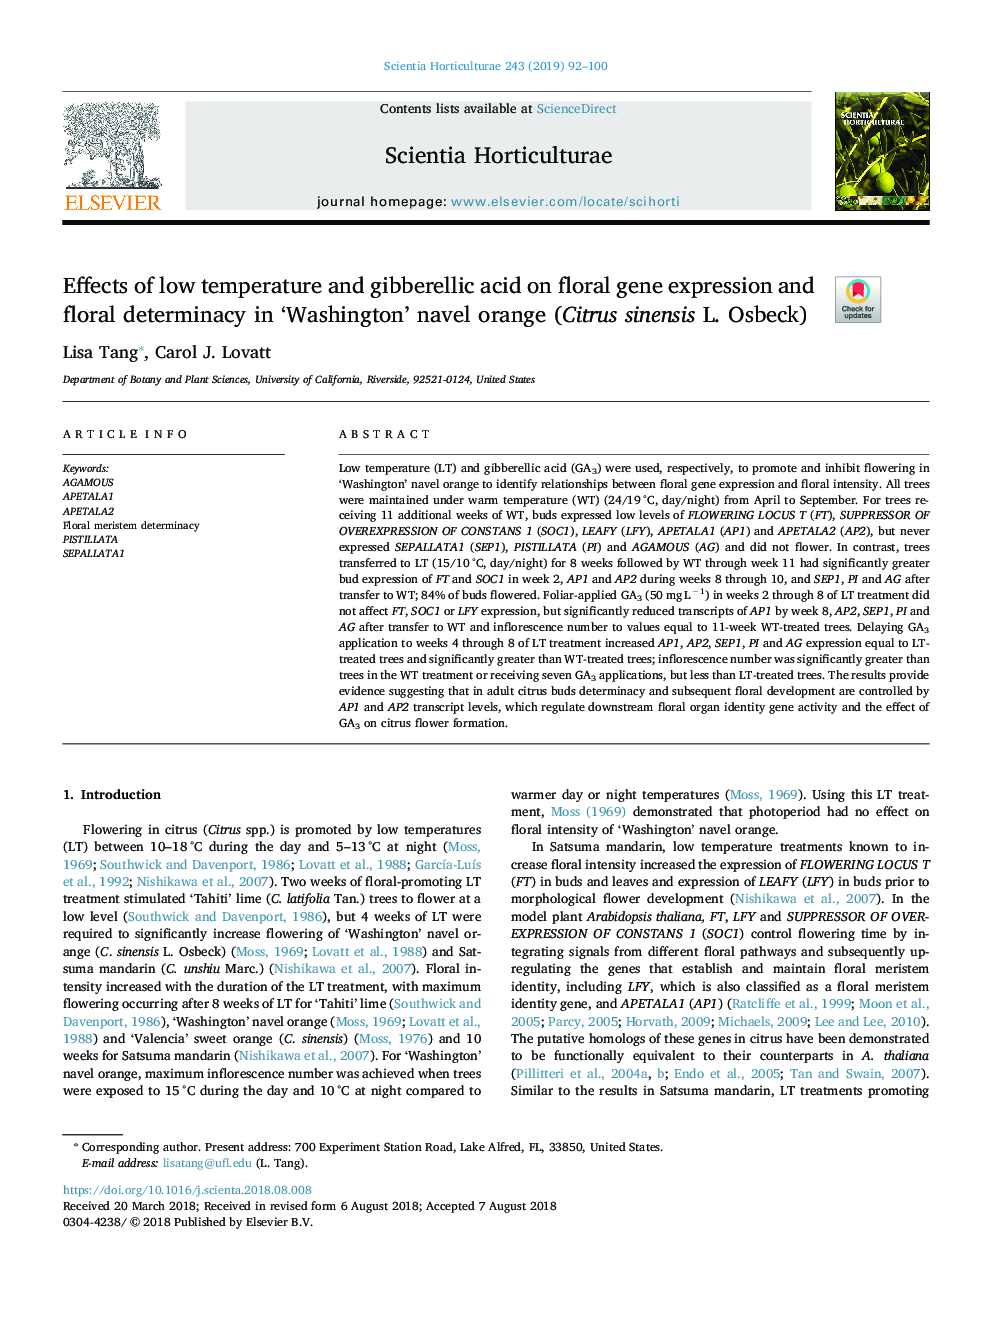 Effects of low temperature and gibberellic acid on floral gene expression and floral determinacy in 'Washington' navel orange (Citrus sinensis L. Osbeck)